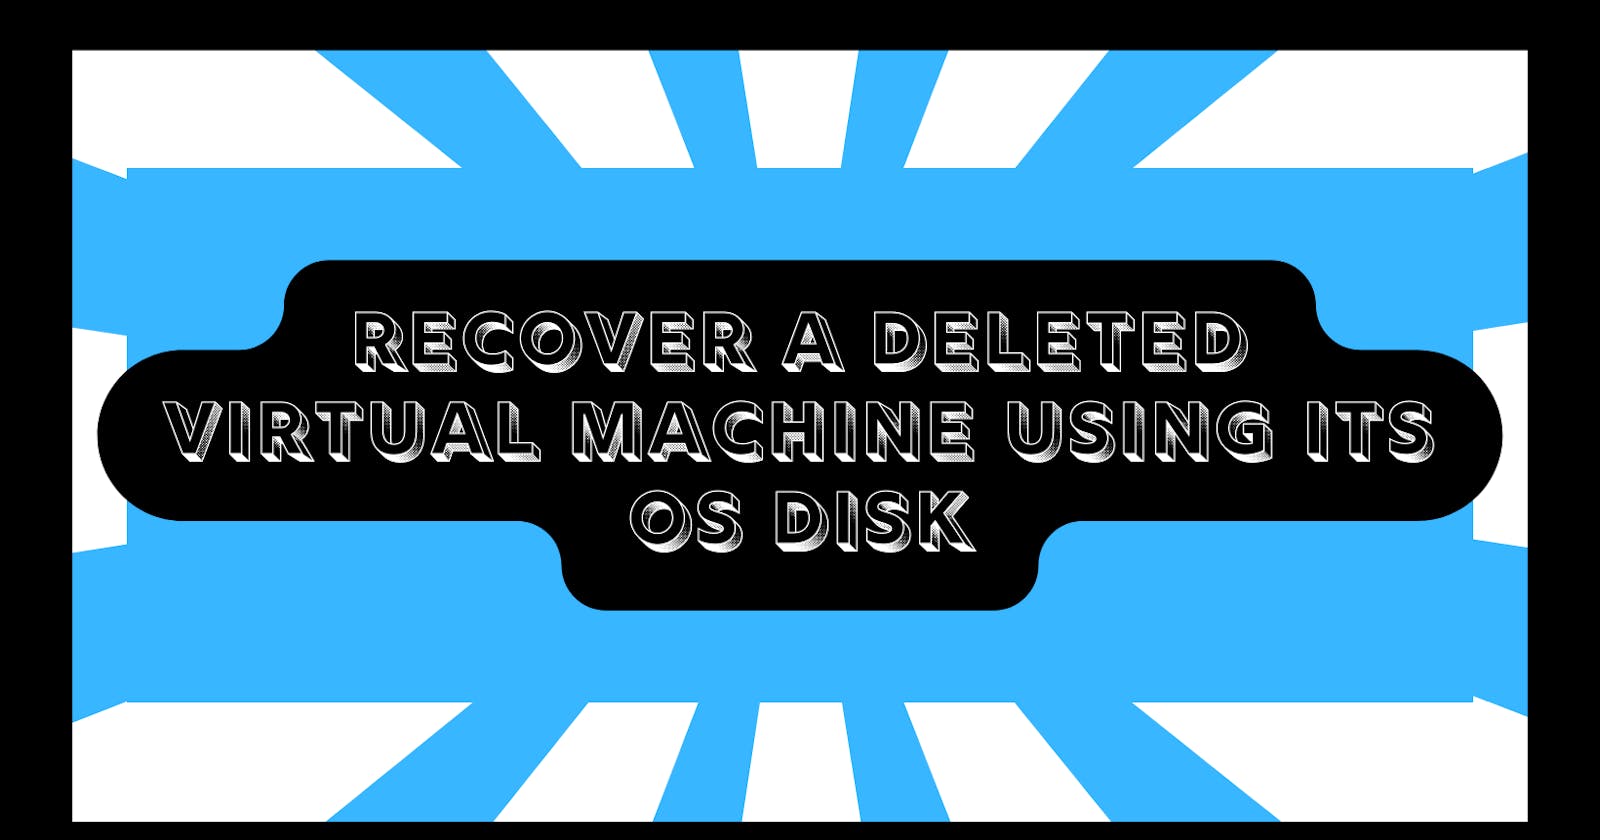 Recover a deleted virtual machine using its OS Disk